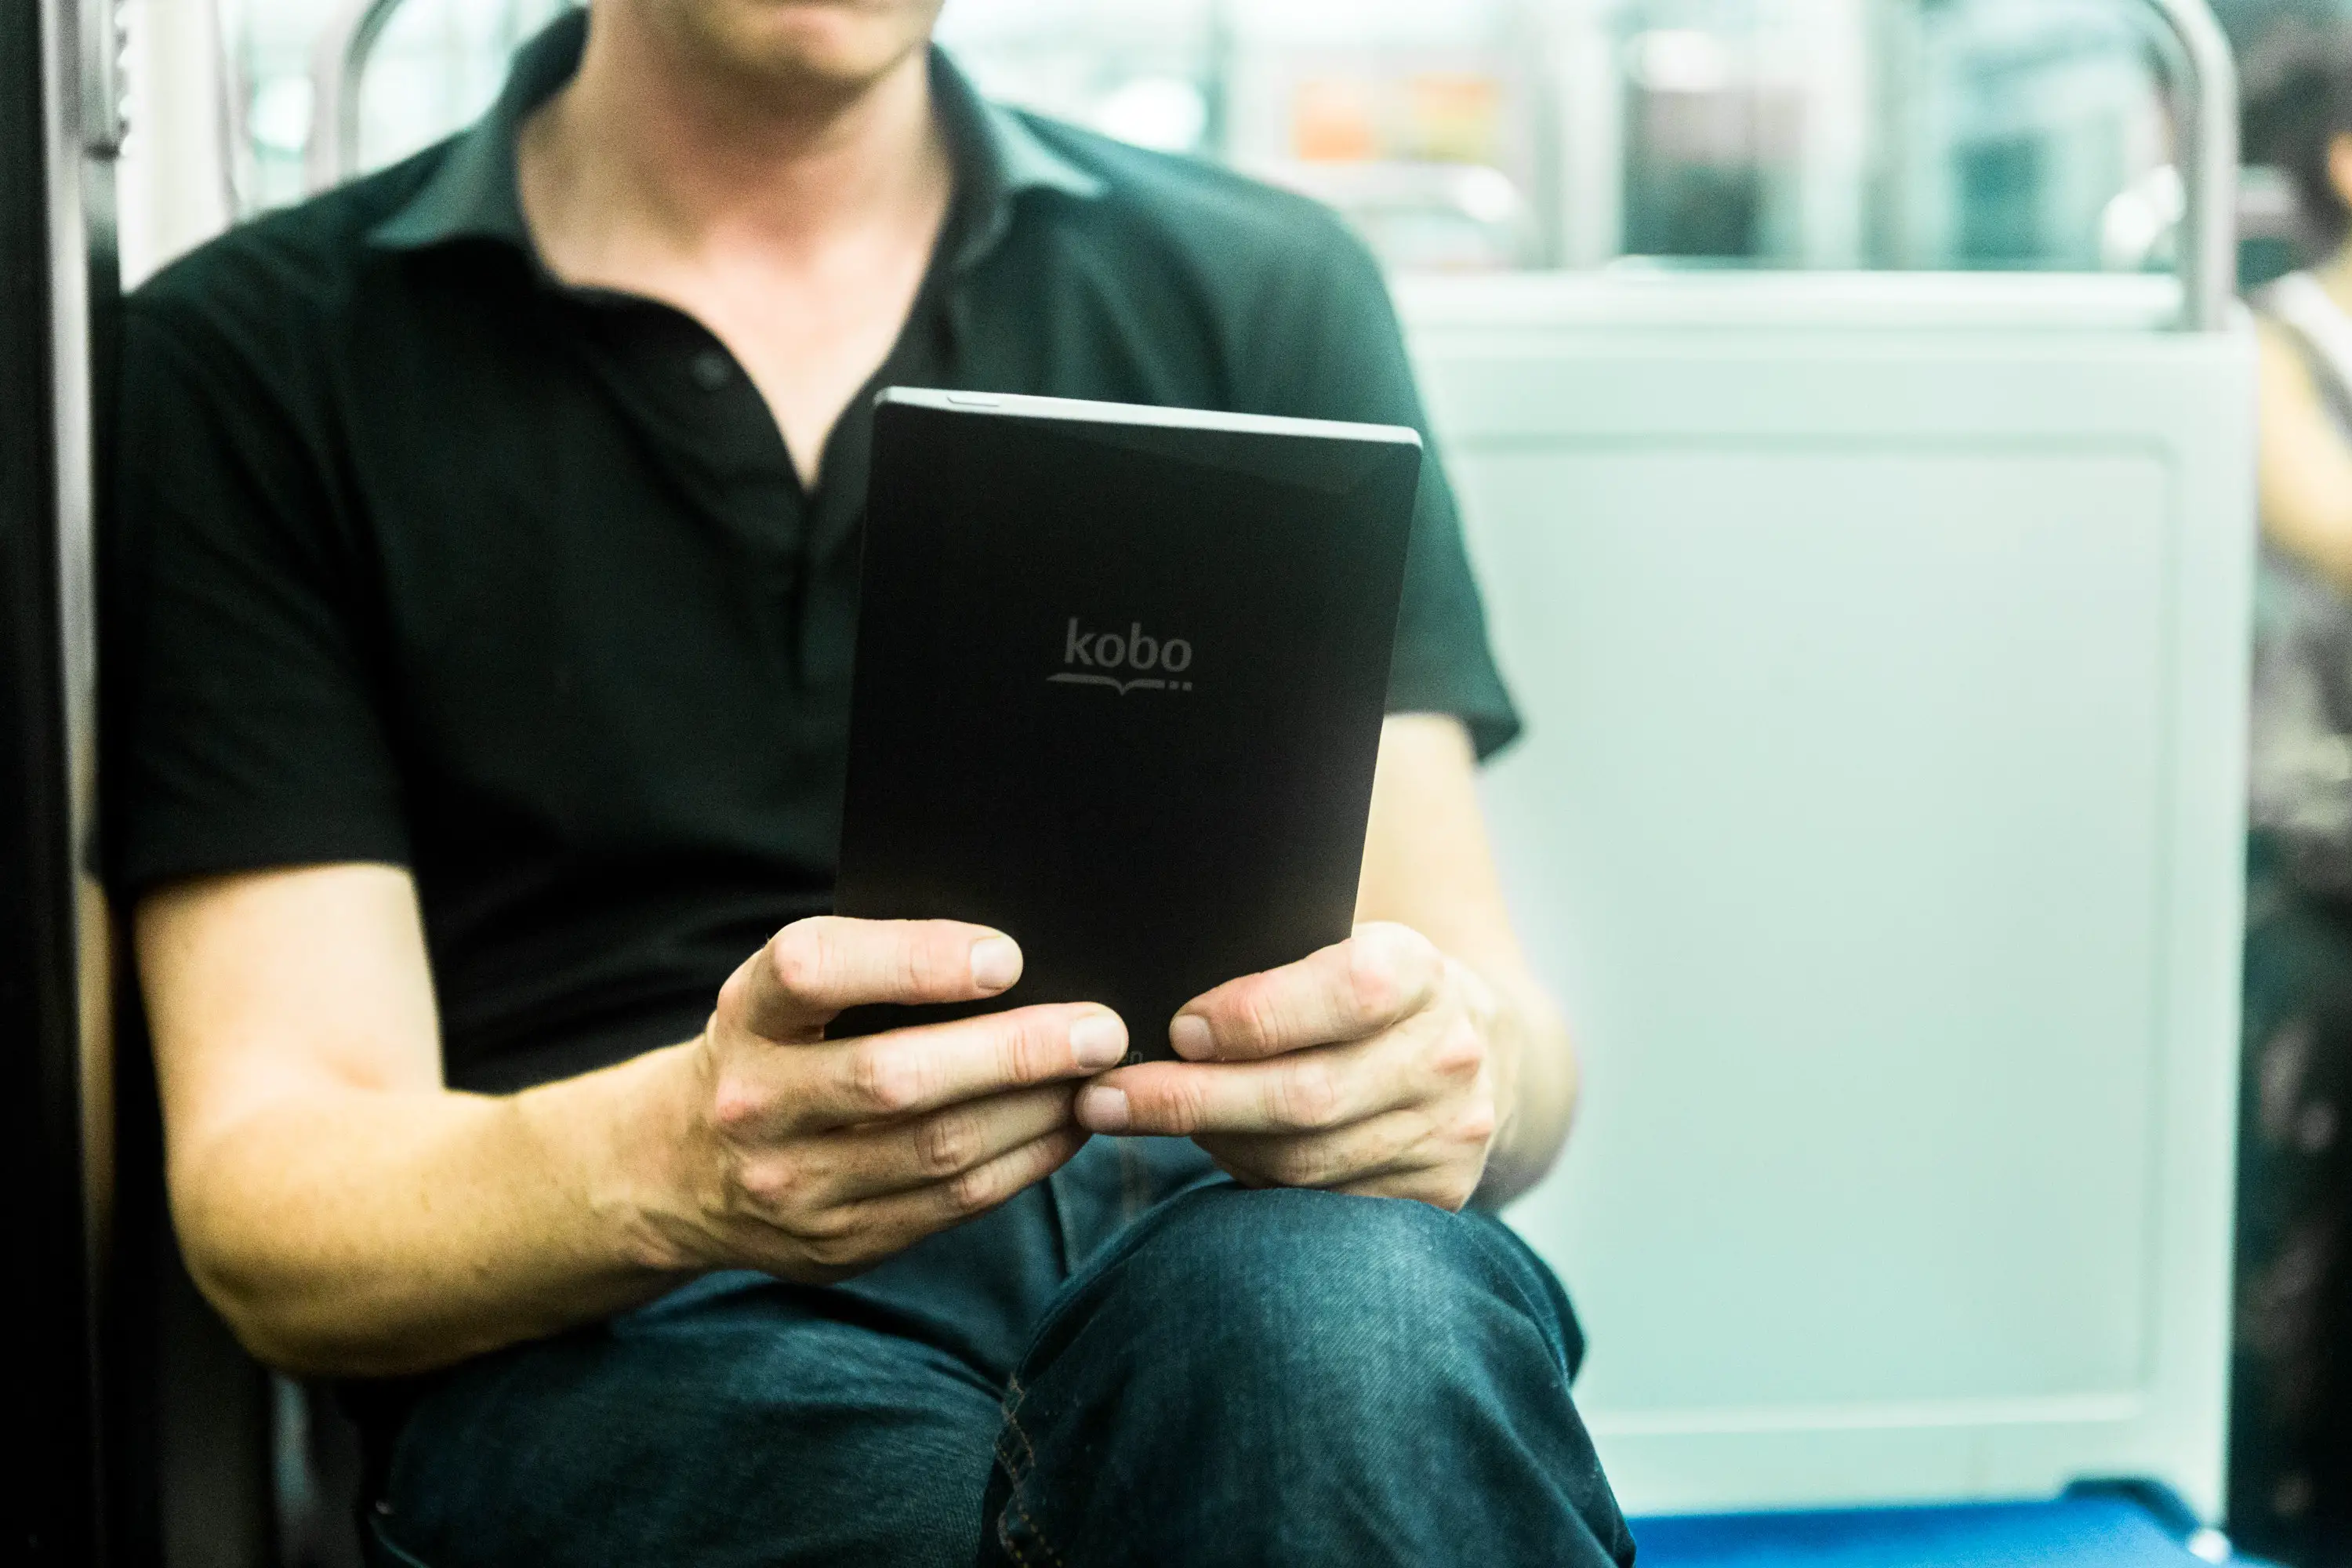 An in-depth review of the best e-readers available in 2019.